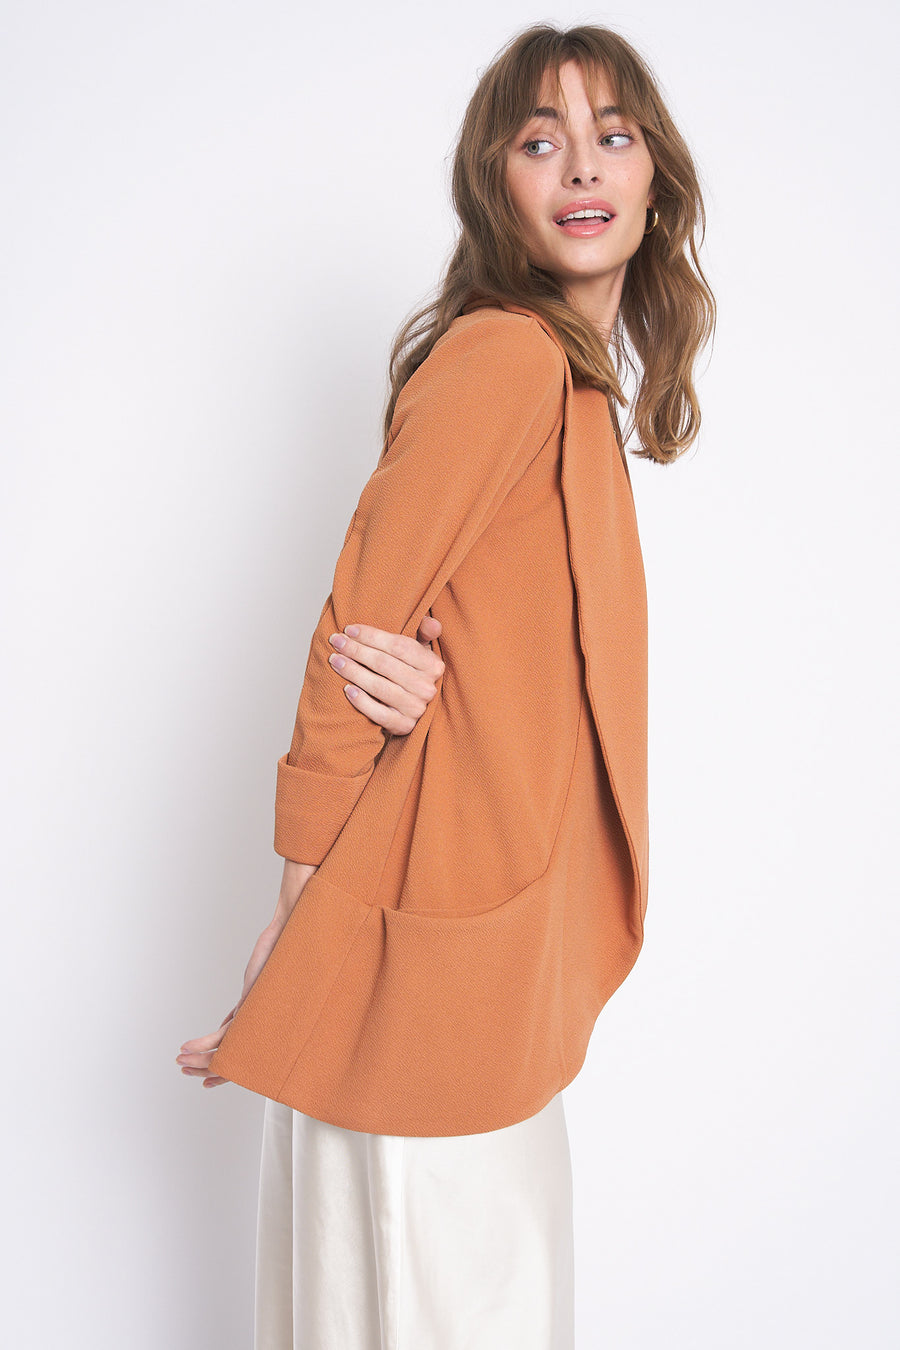 No Srcipt image - Images of 4 of 5 Classic Melanie Shawl Ash Brown Color Staple Workwear Blazer